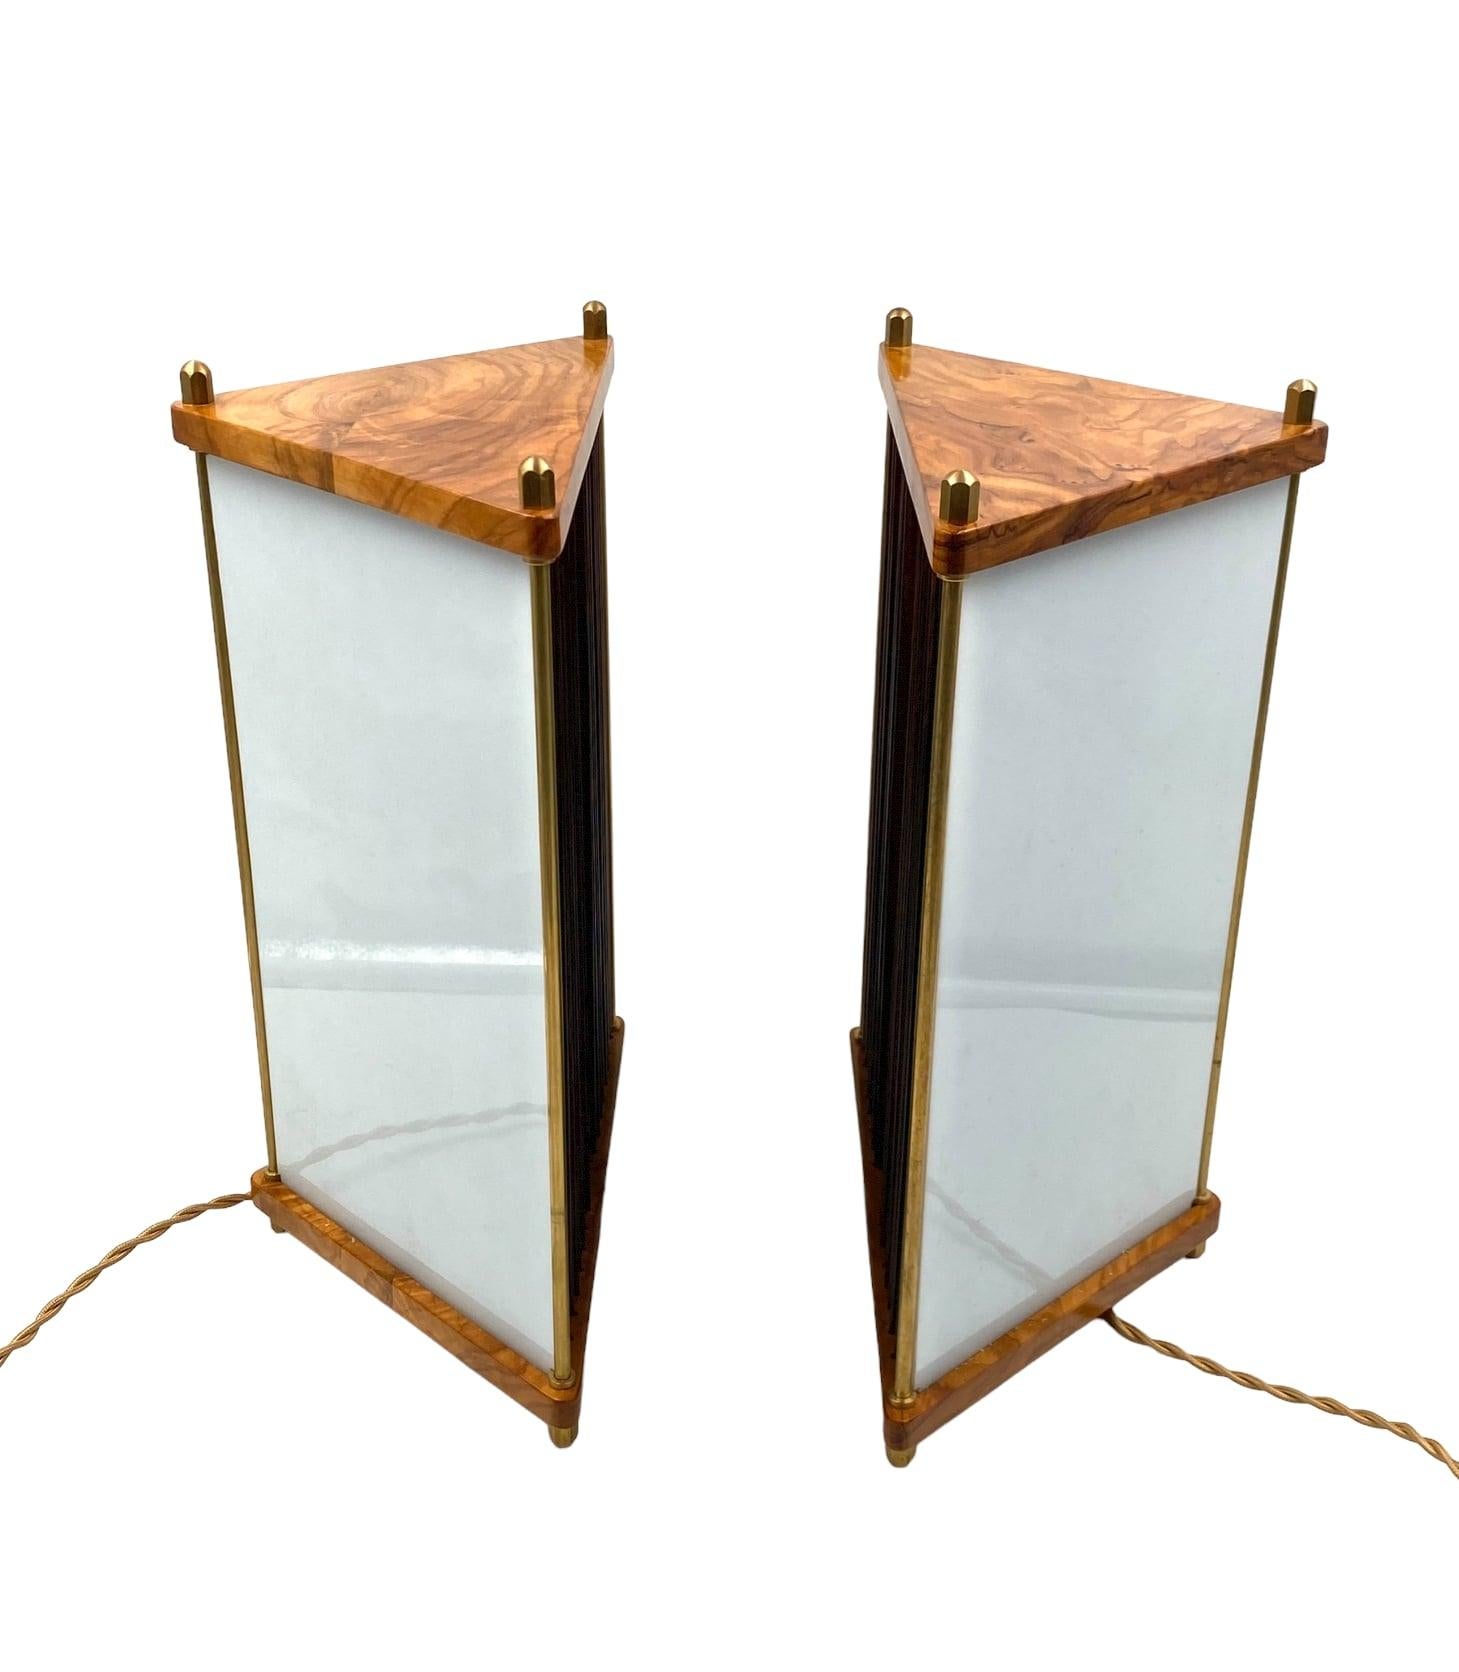 Leonardo Mosso, 2 Wood and Brass Table Lamps, Italy, 1970s For Sale 6